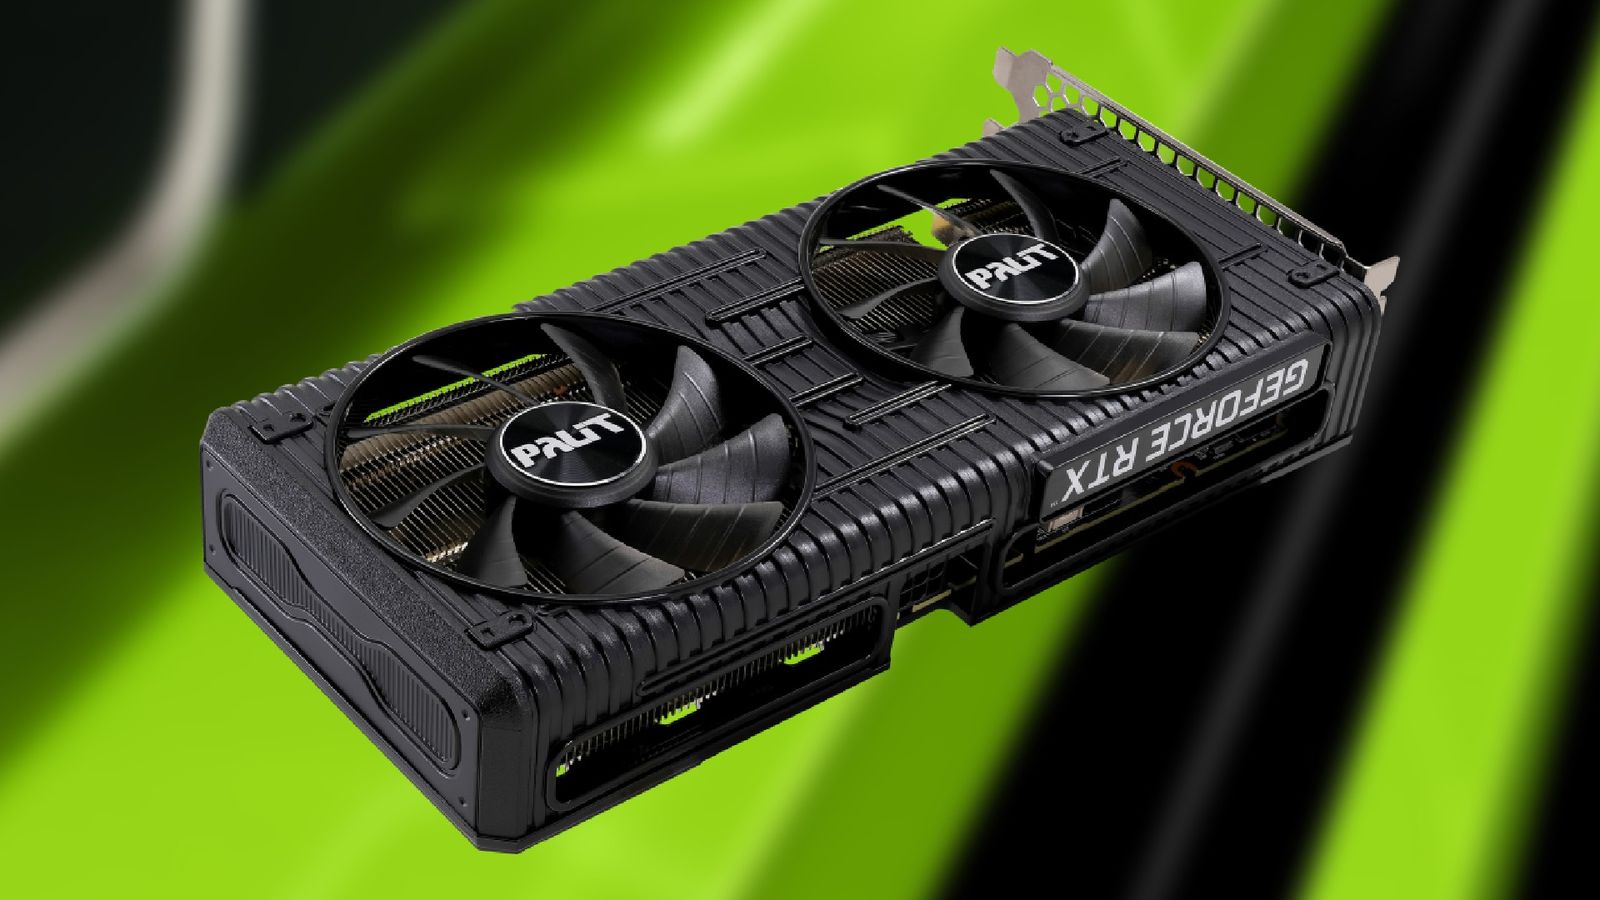 Palit RTX 3050 in front of an Nvidia press image